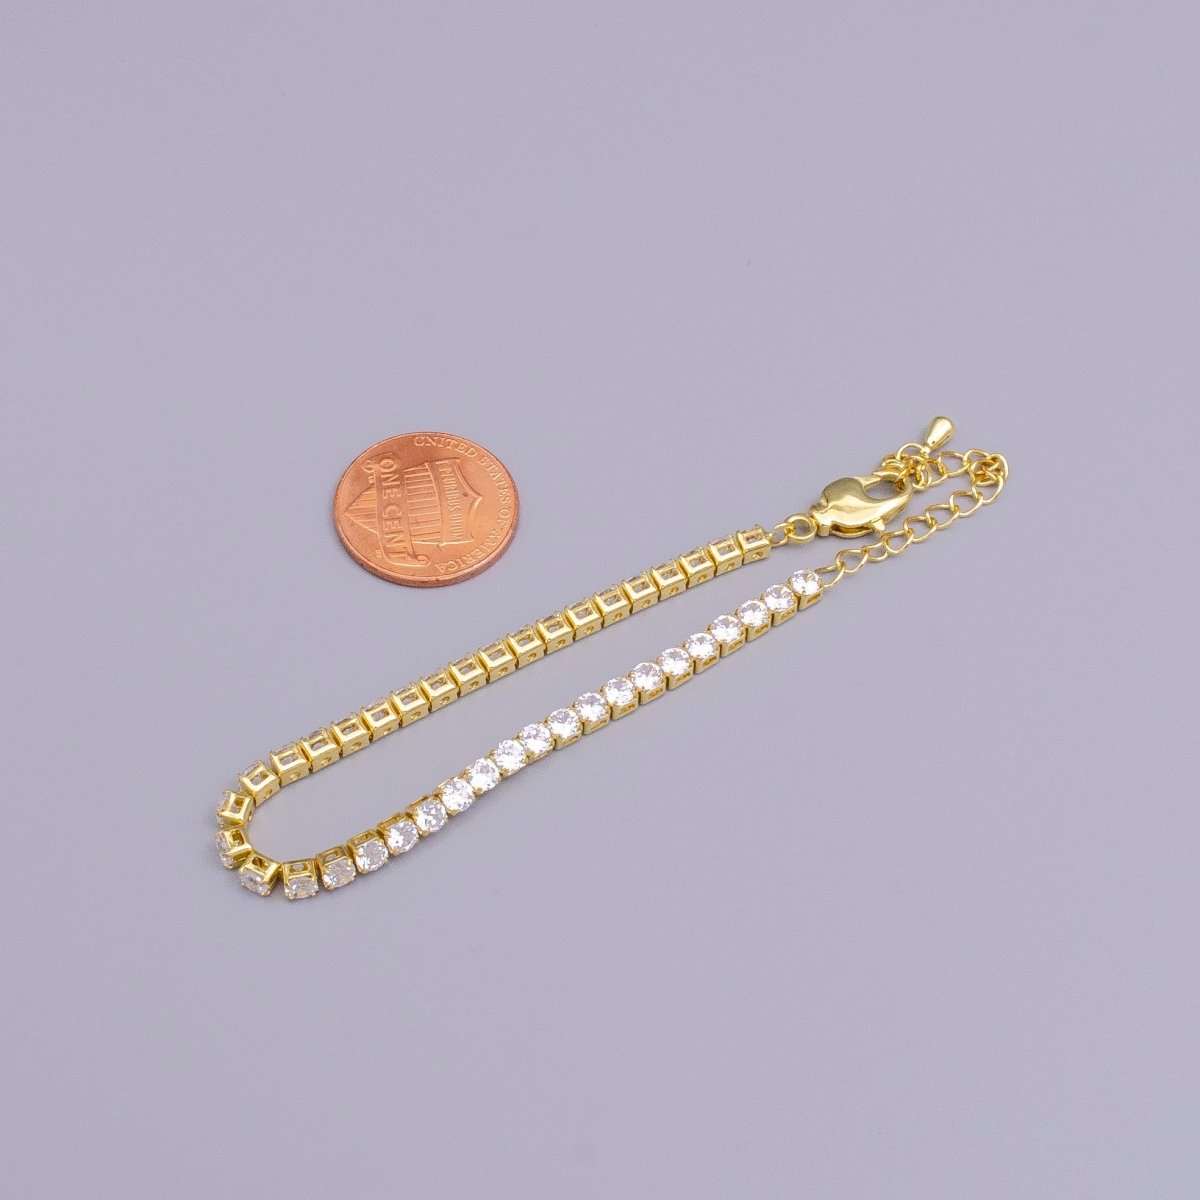 16K Gold Filled 3mm Clear Crystal Tennis Chain 5.75", 6.25", 7.25" Bracelet | WA-1884 - WA-1886 Clearance Pricing - DLUXCA